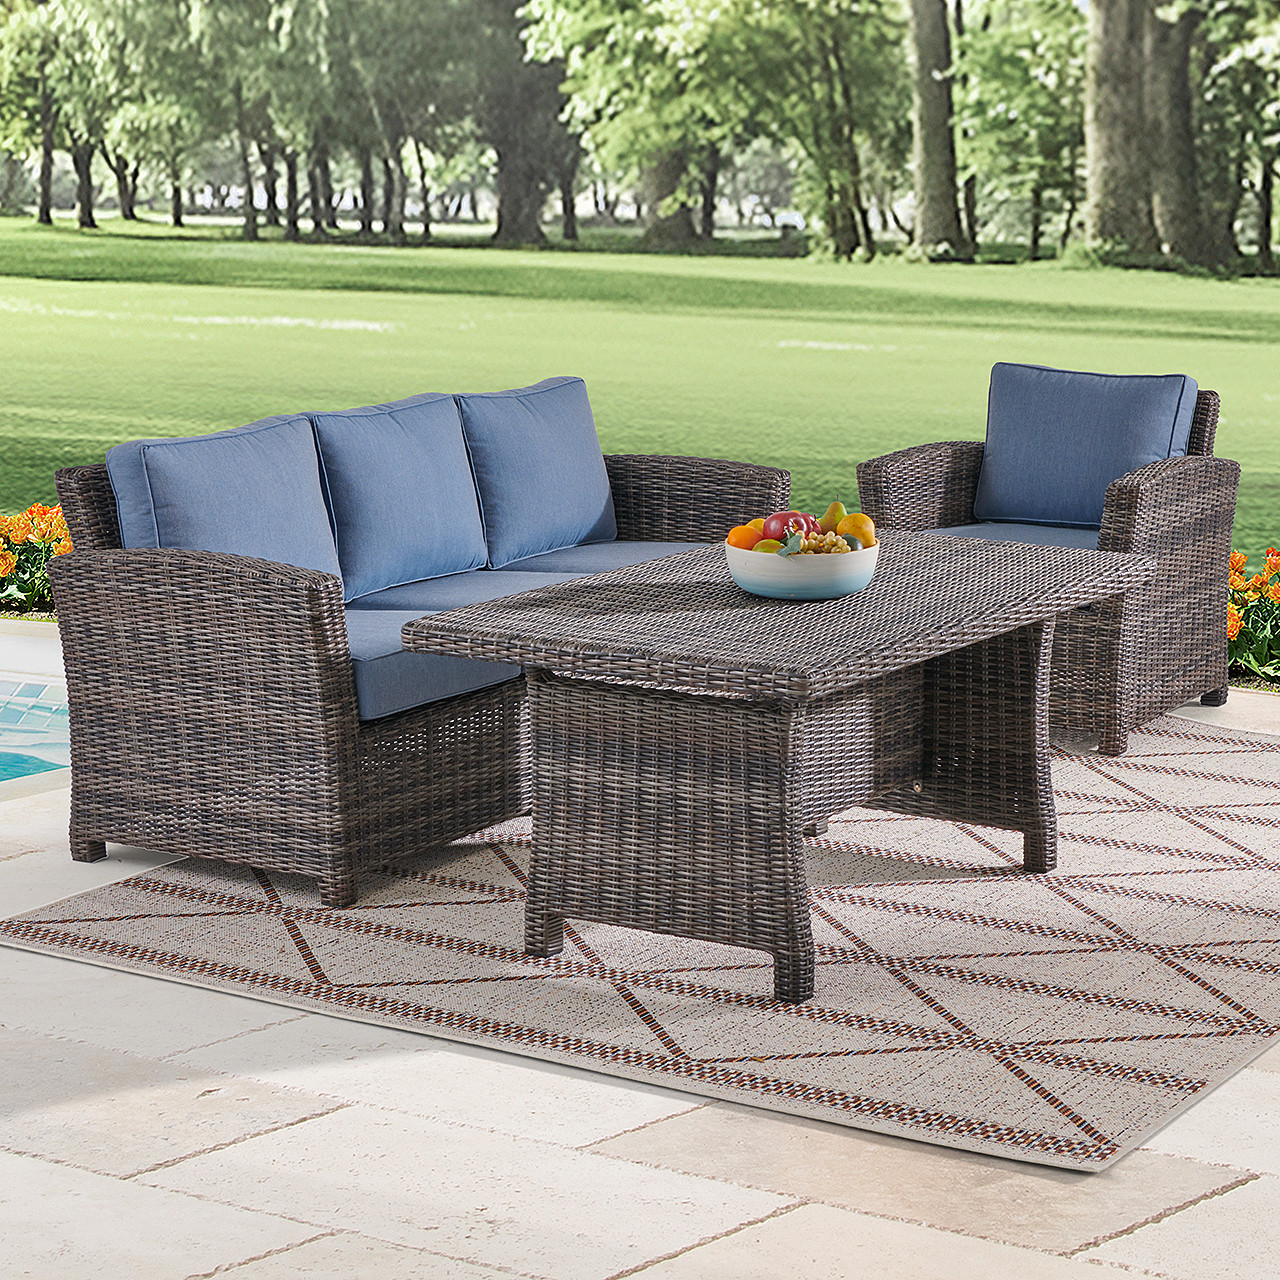 Venice Silver Oak Outdoor Wicker with Cushions 3 Piece Sofa Group + 59 x 32 in. Woven Top Lounge Table